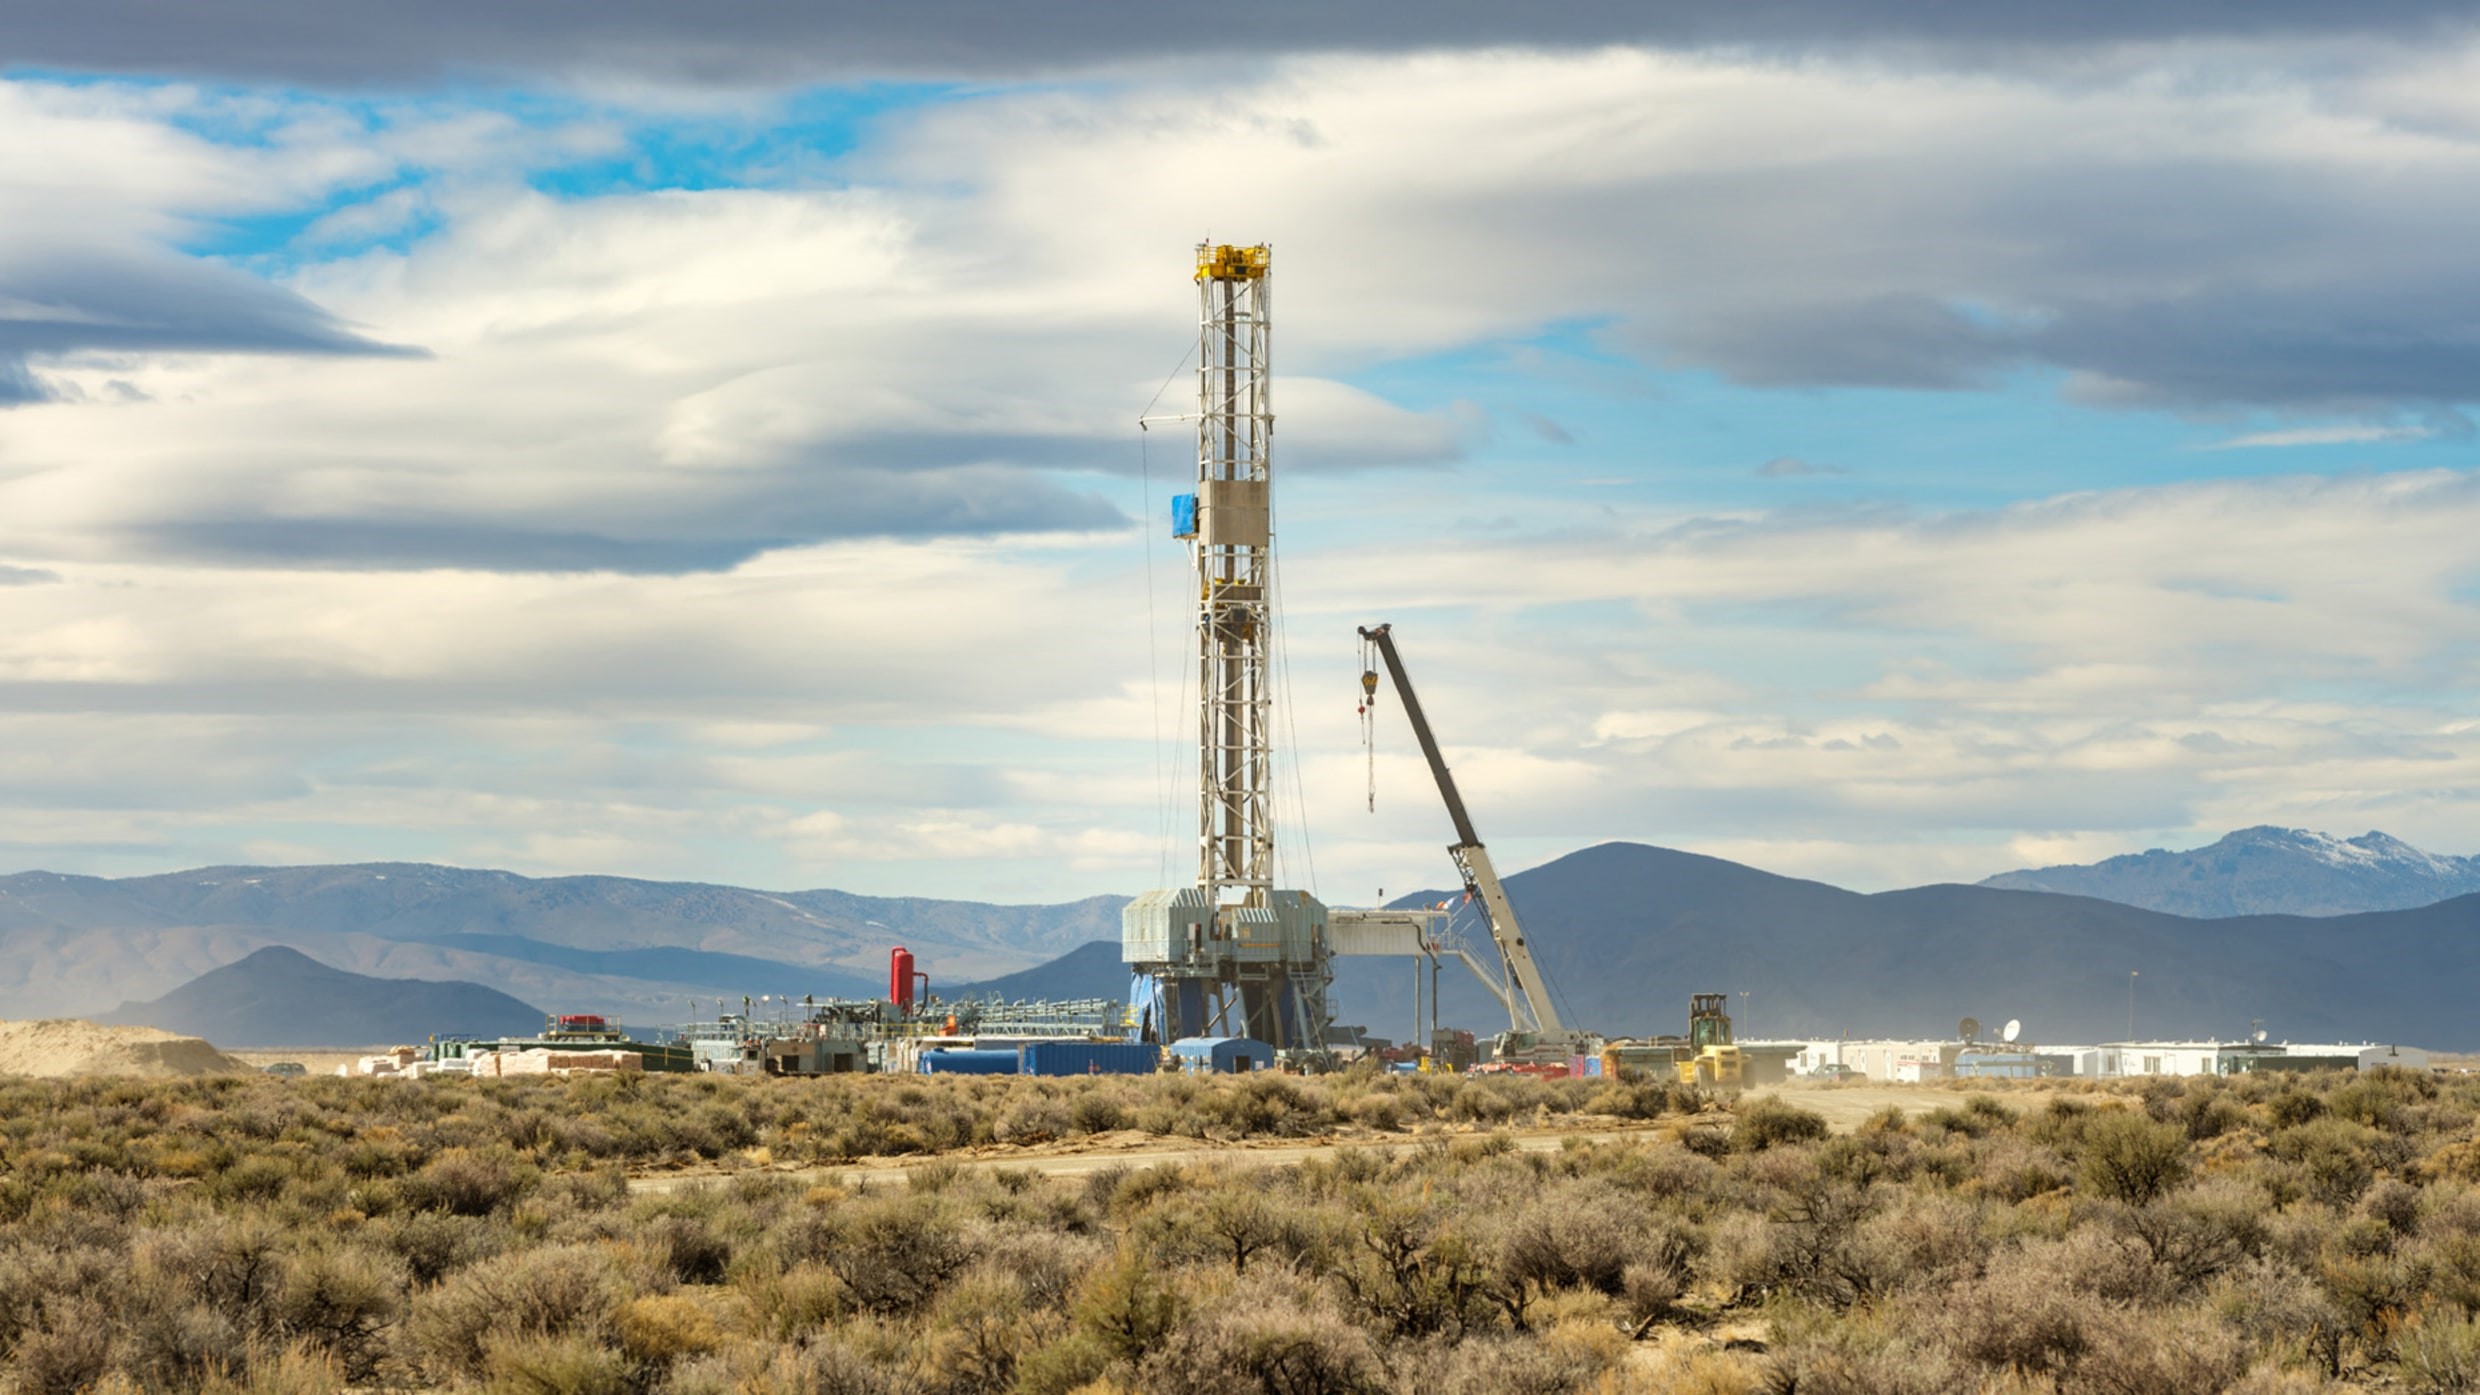 This new geothermal plant in the Nevada desert is helping power Google data centers